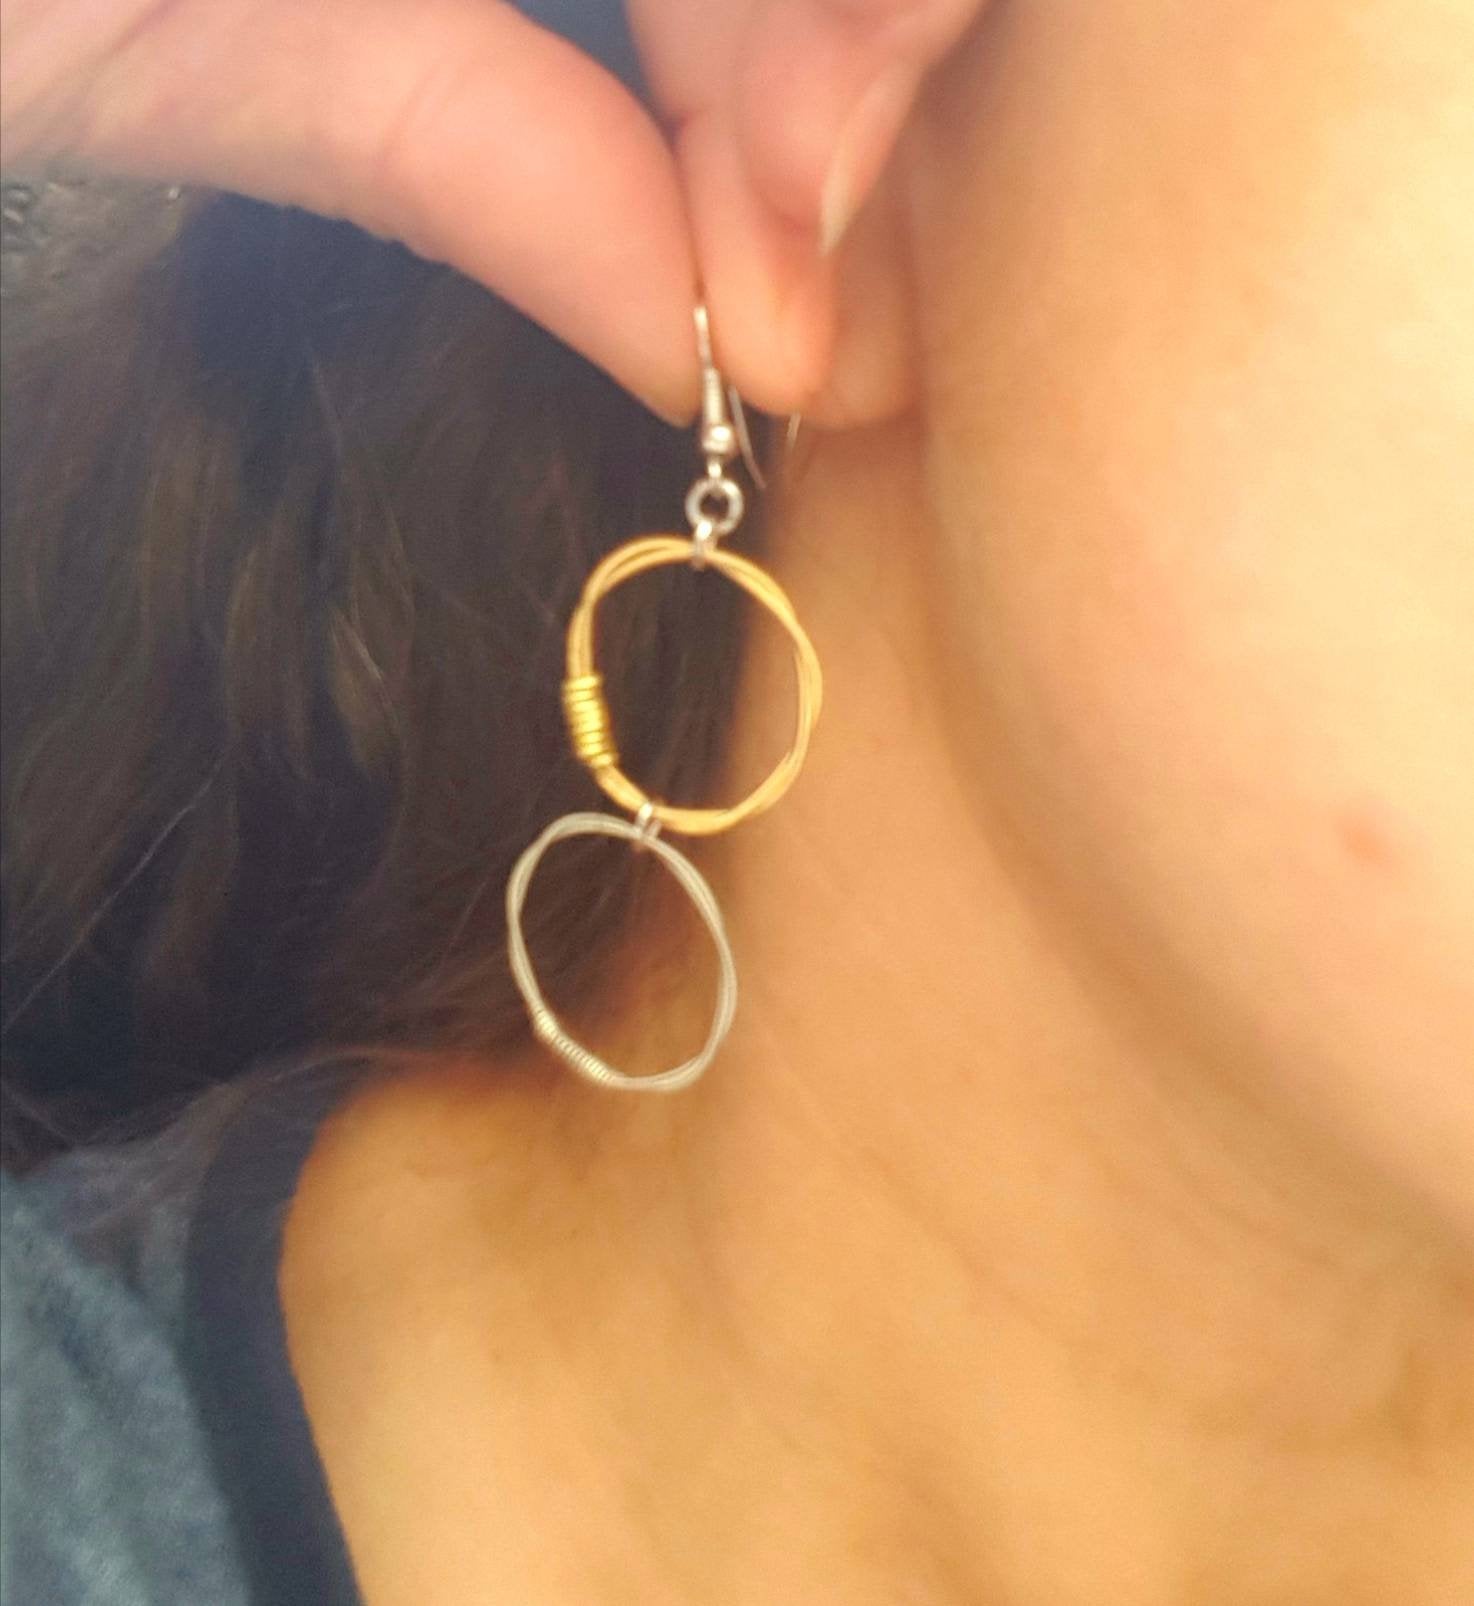 side of woman's head with brown hair, fingers are holding an earring near the ear, the top hoop of the earring is a gold coloured guitar string, the bottom hoop of the earring is made from a silver coloured guitar string